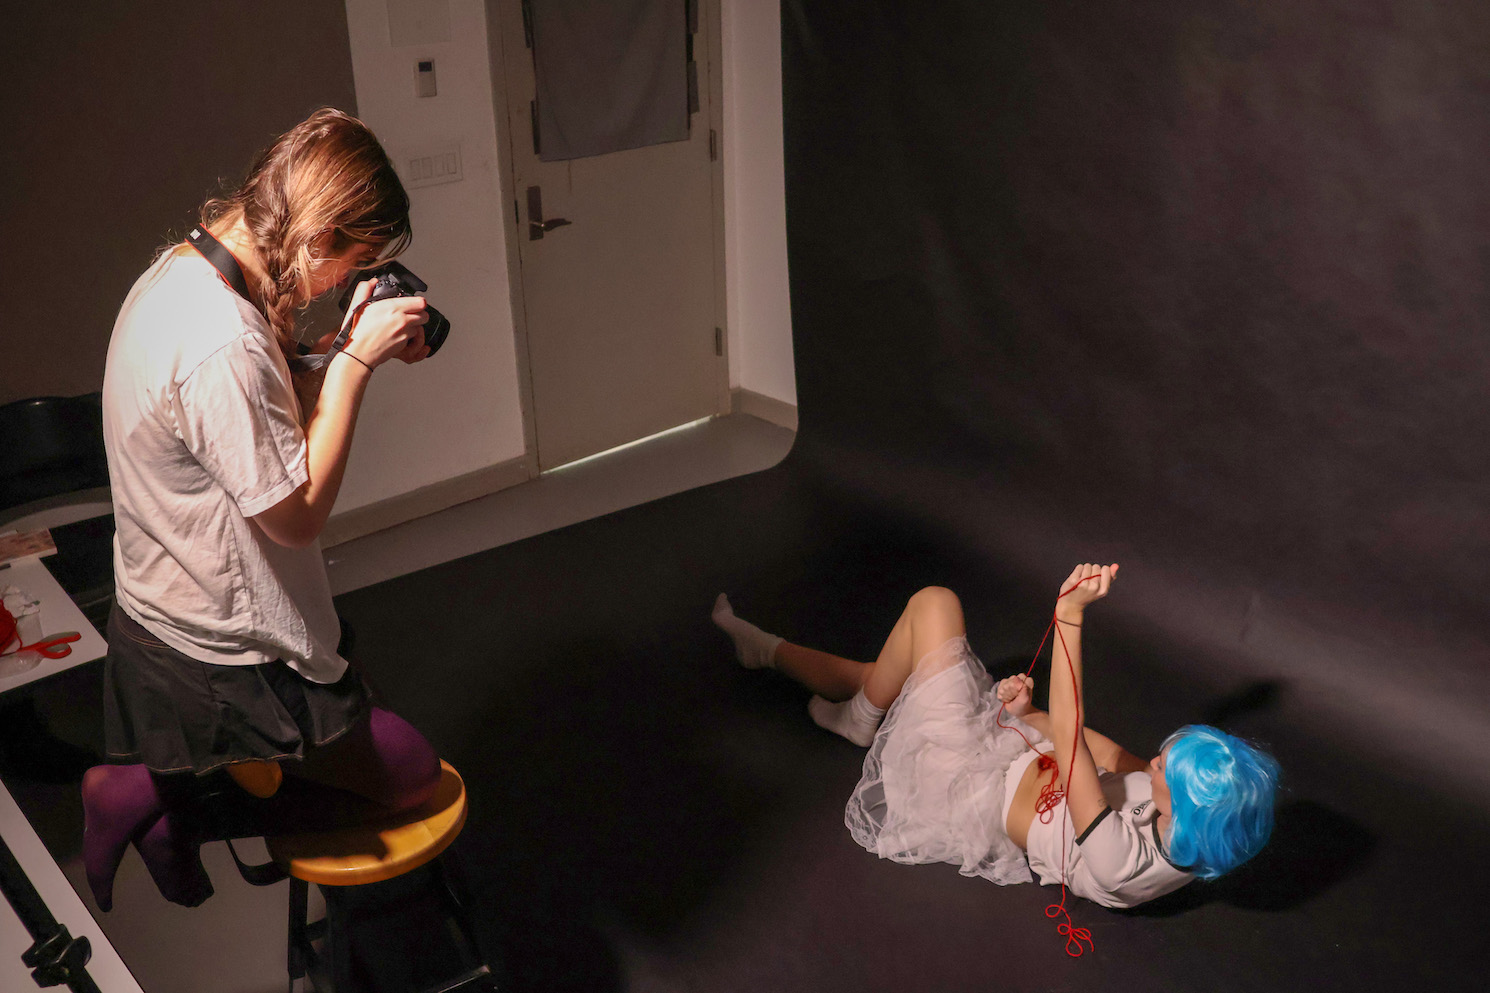 Photograph of a female college student with braided blond hair wearing a white t-shirt, a black skirt, maroon leggings, and gold bracelets holding a DSLR camera taking a photo of a girl laying on the ground in front of a black backdrop wearing a short blue wig, white crop top, white fluffy skirt, holding red string in her hands.